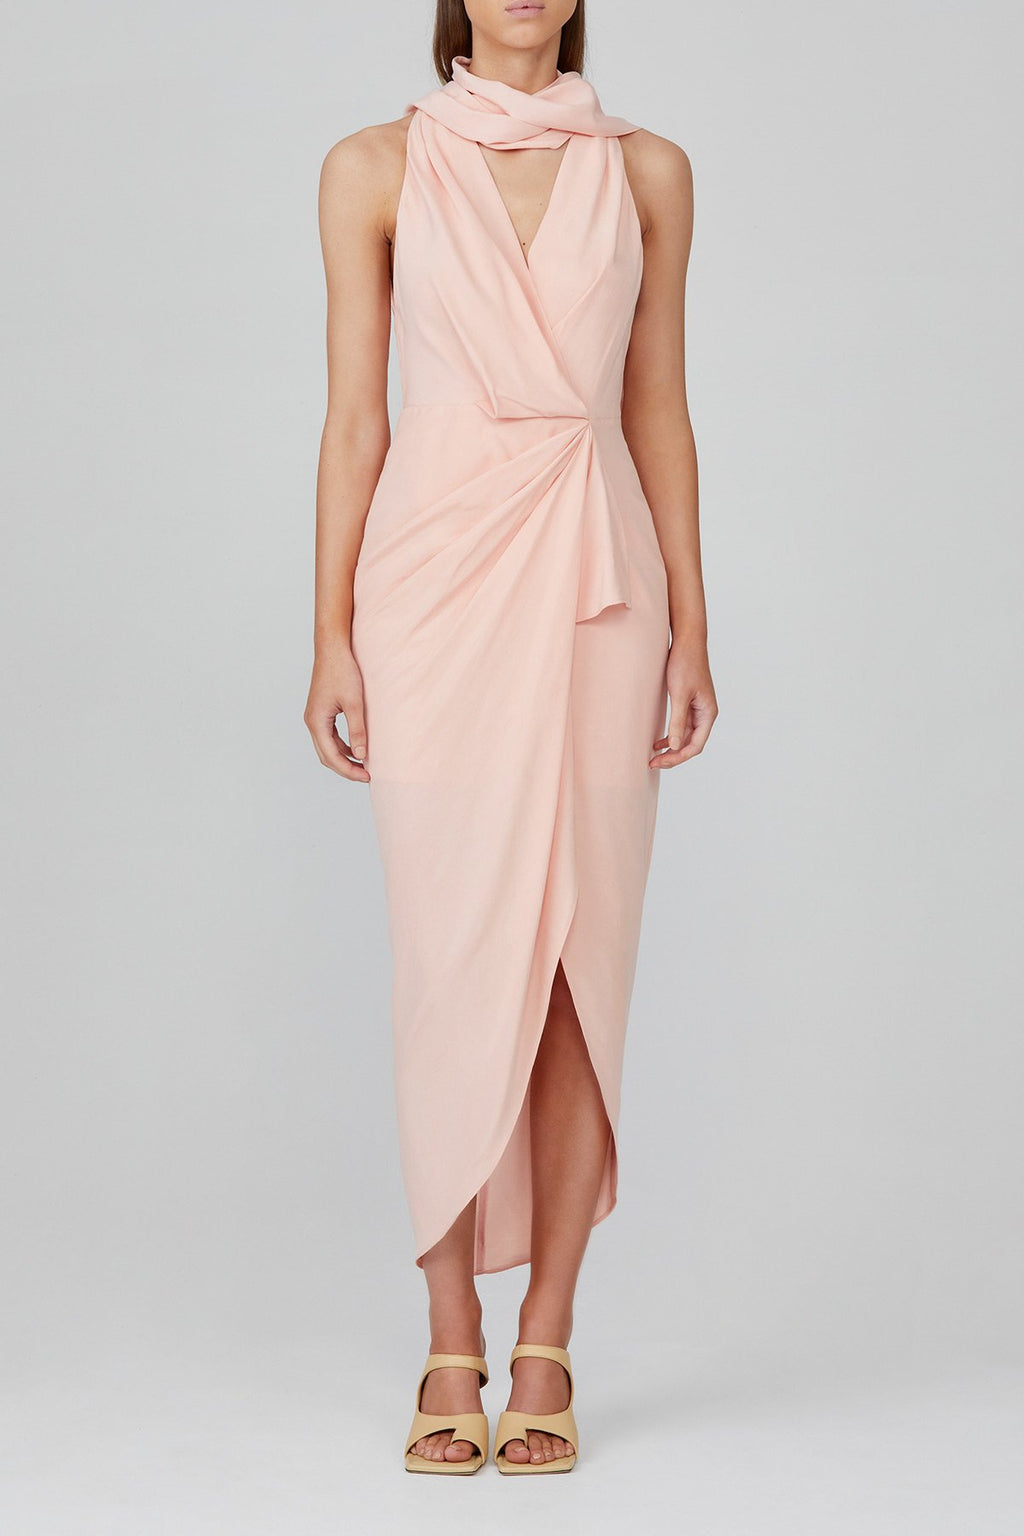 Acler Daleside Dress In Rose Pink